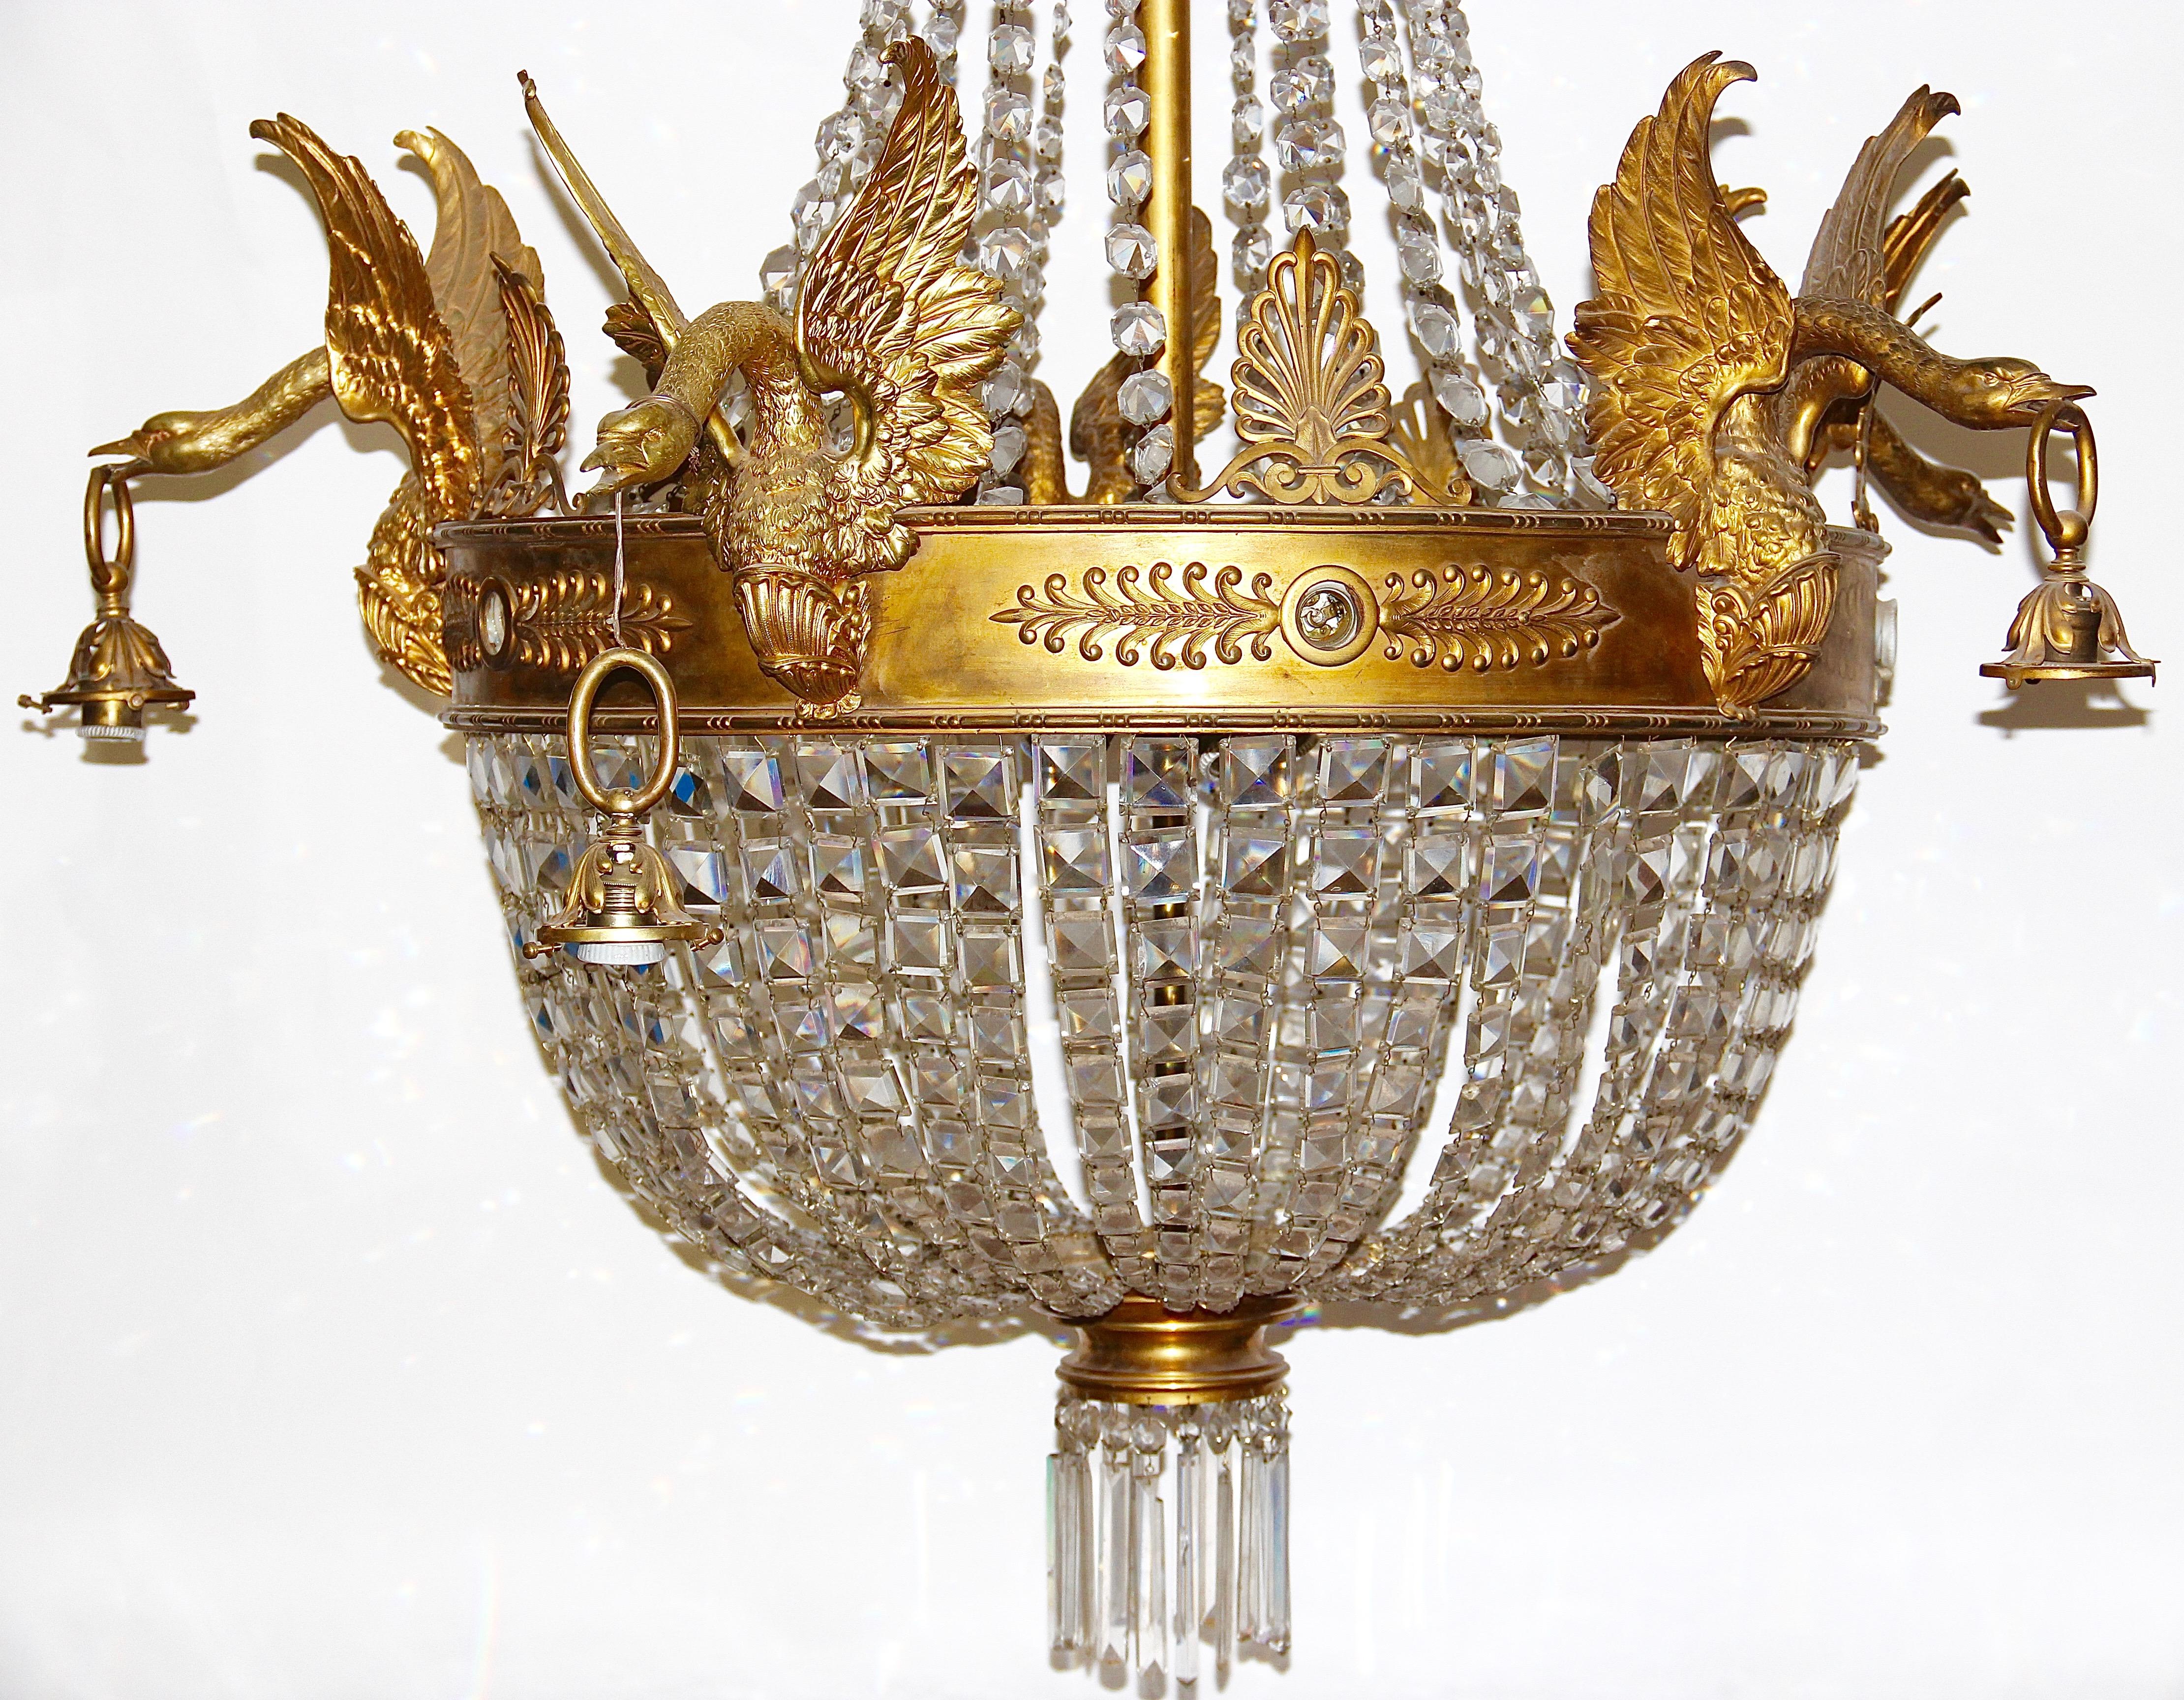 Extremely decorative, heavy and high quality Empire chandelier,
19th century.

No replica. Staffed with five magnificent, fire-gilded bronze swans.

This chandelier impresses with its uniqueness.
The swan is the symbol animal of the Empress